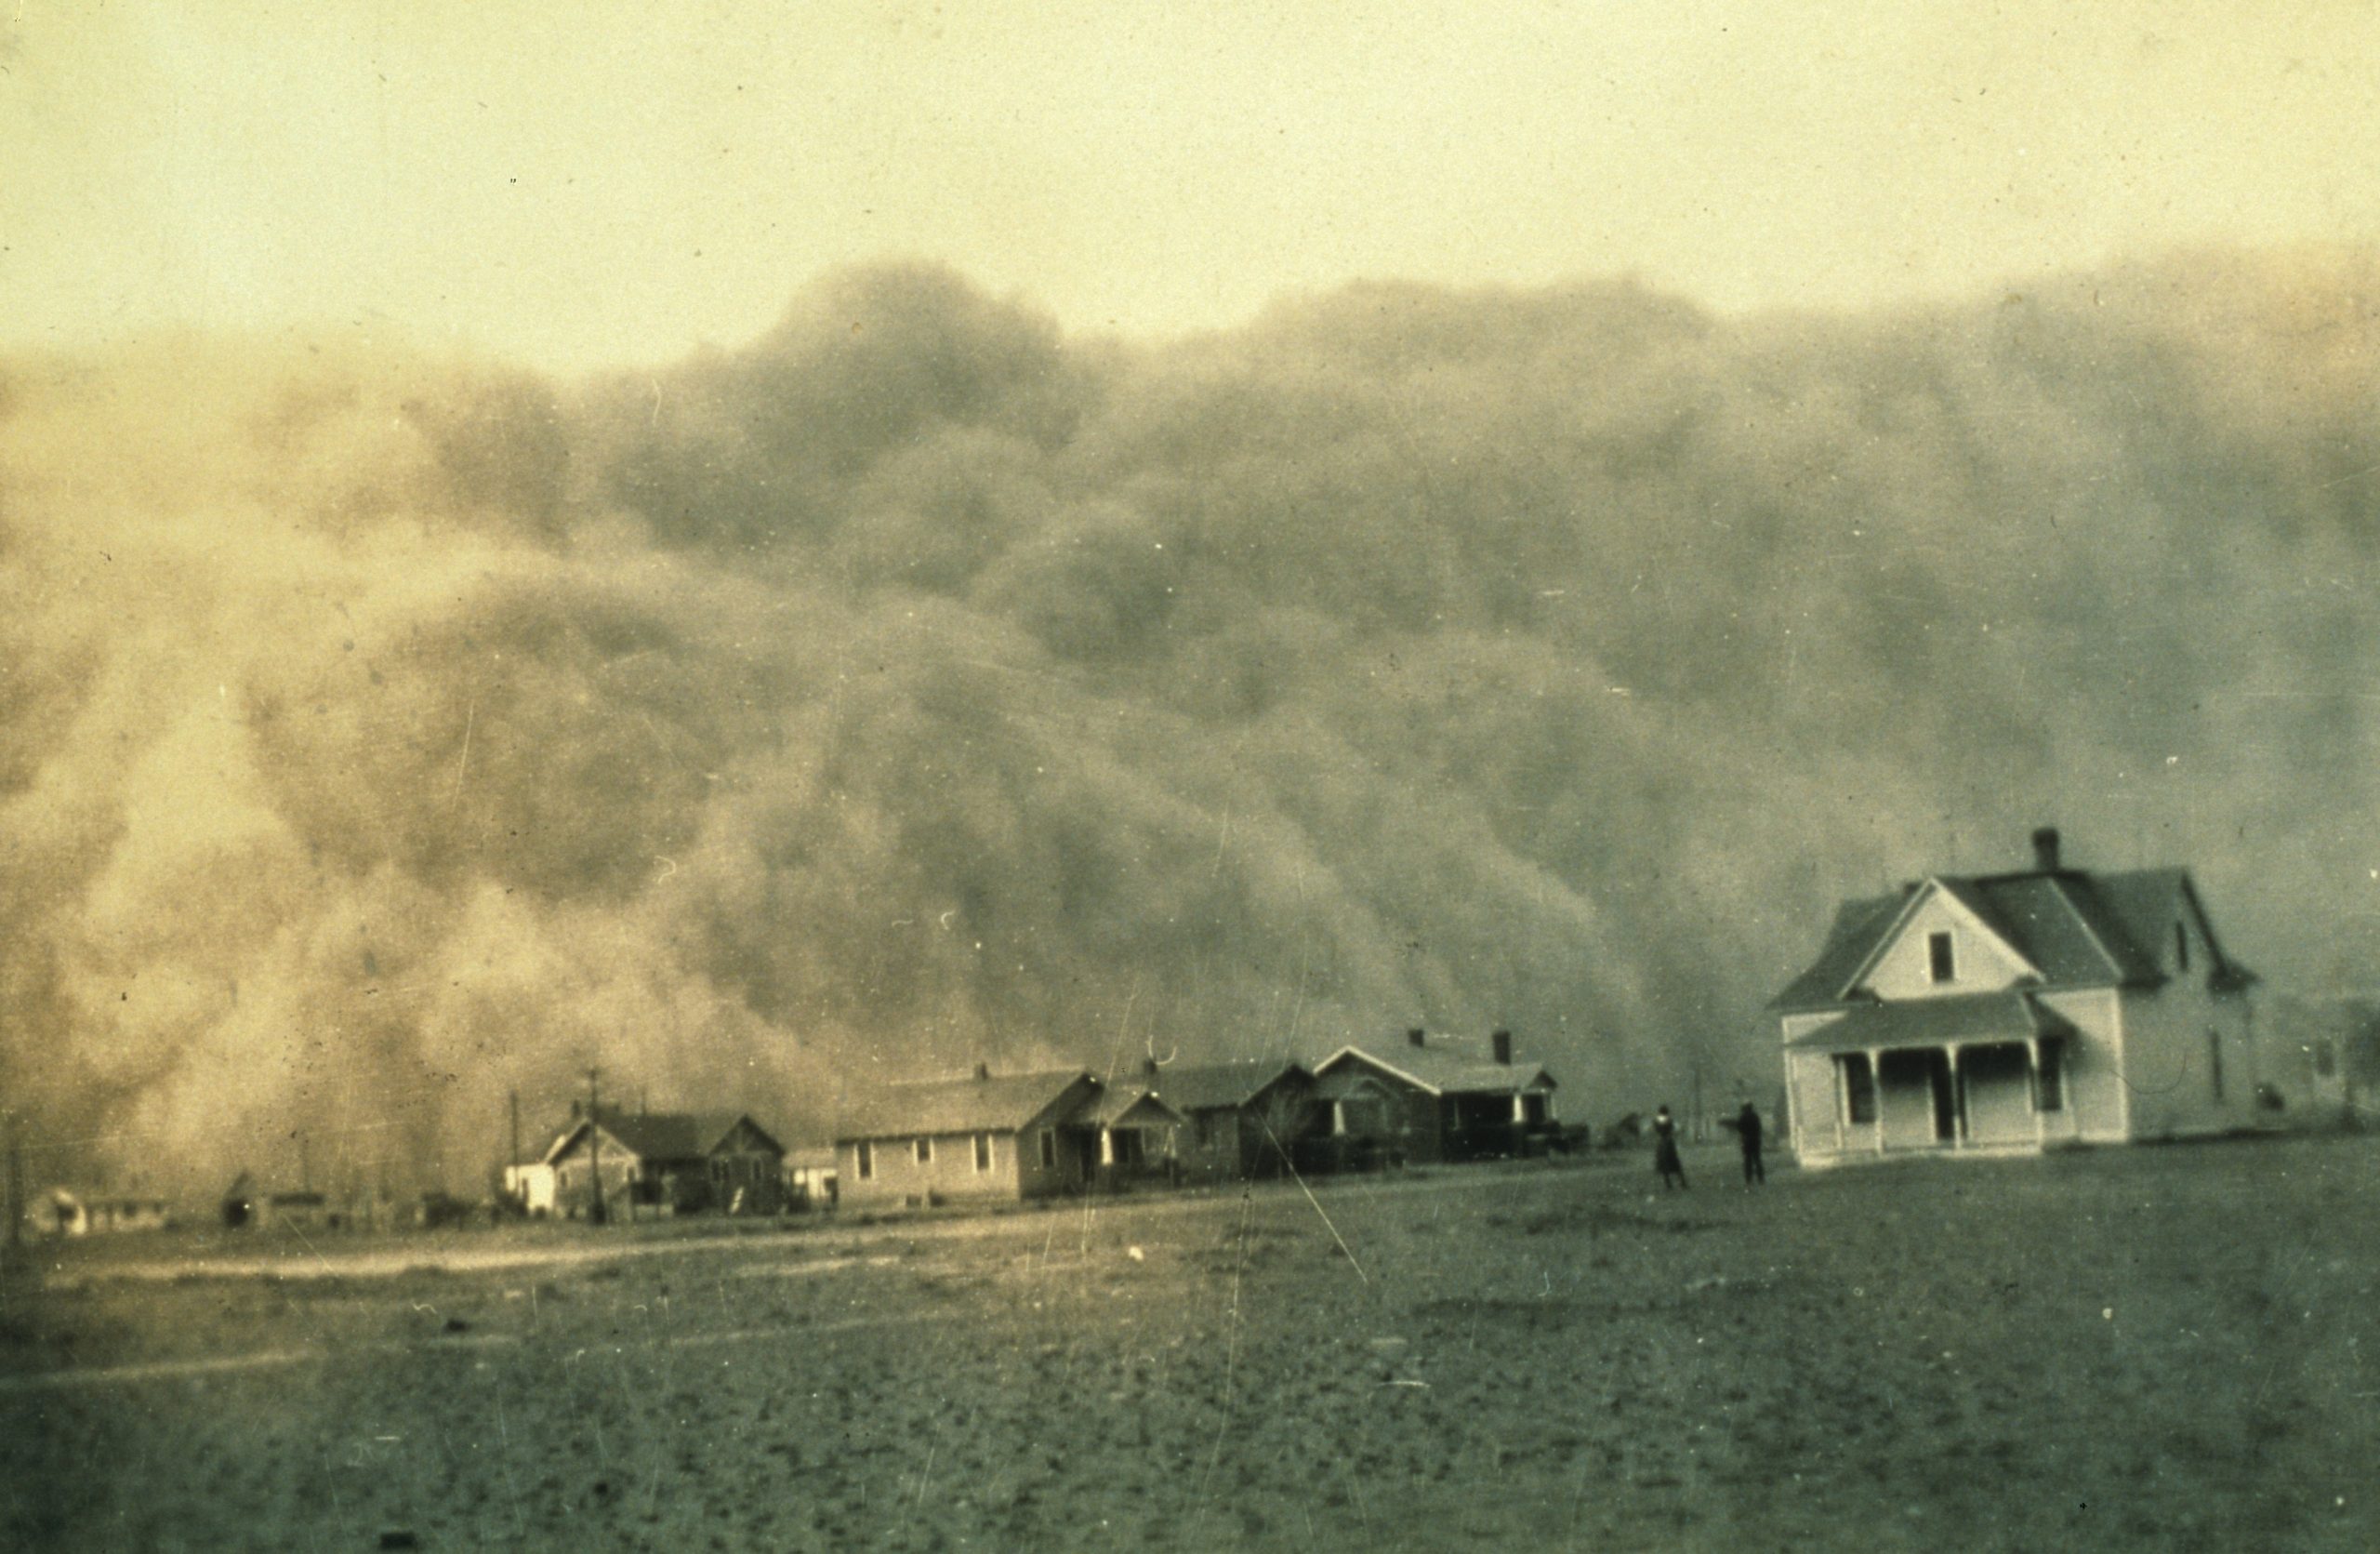 Black and white photo of a few houses on flat land along with two people standing near a house; a giant wall of dust is seen approaching in the background of the photo.